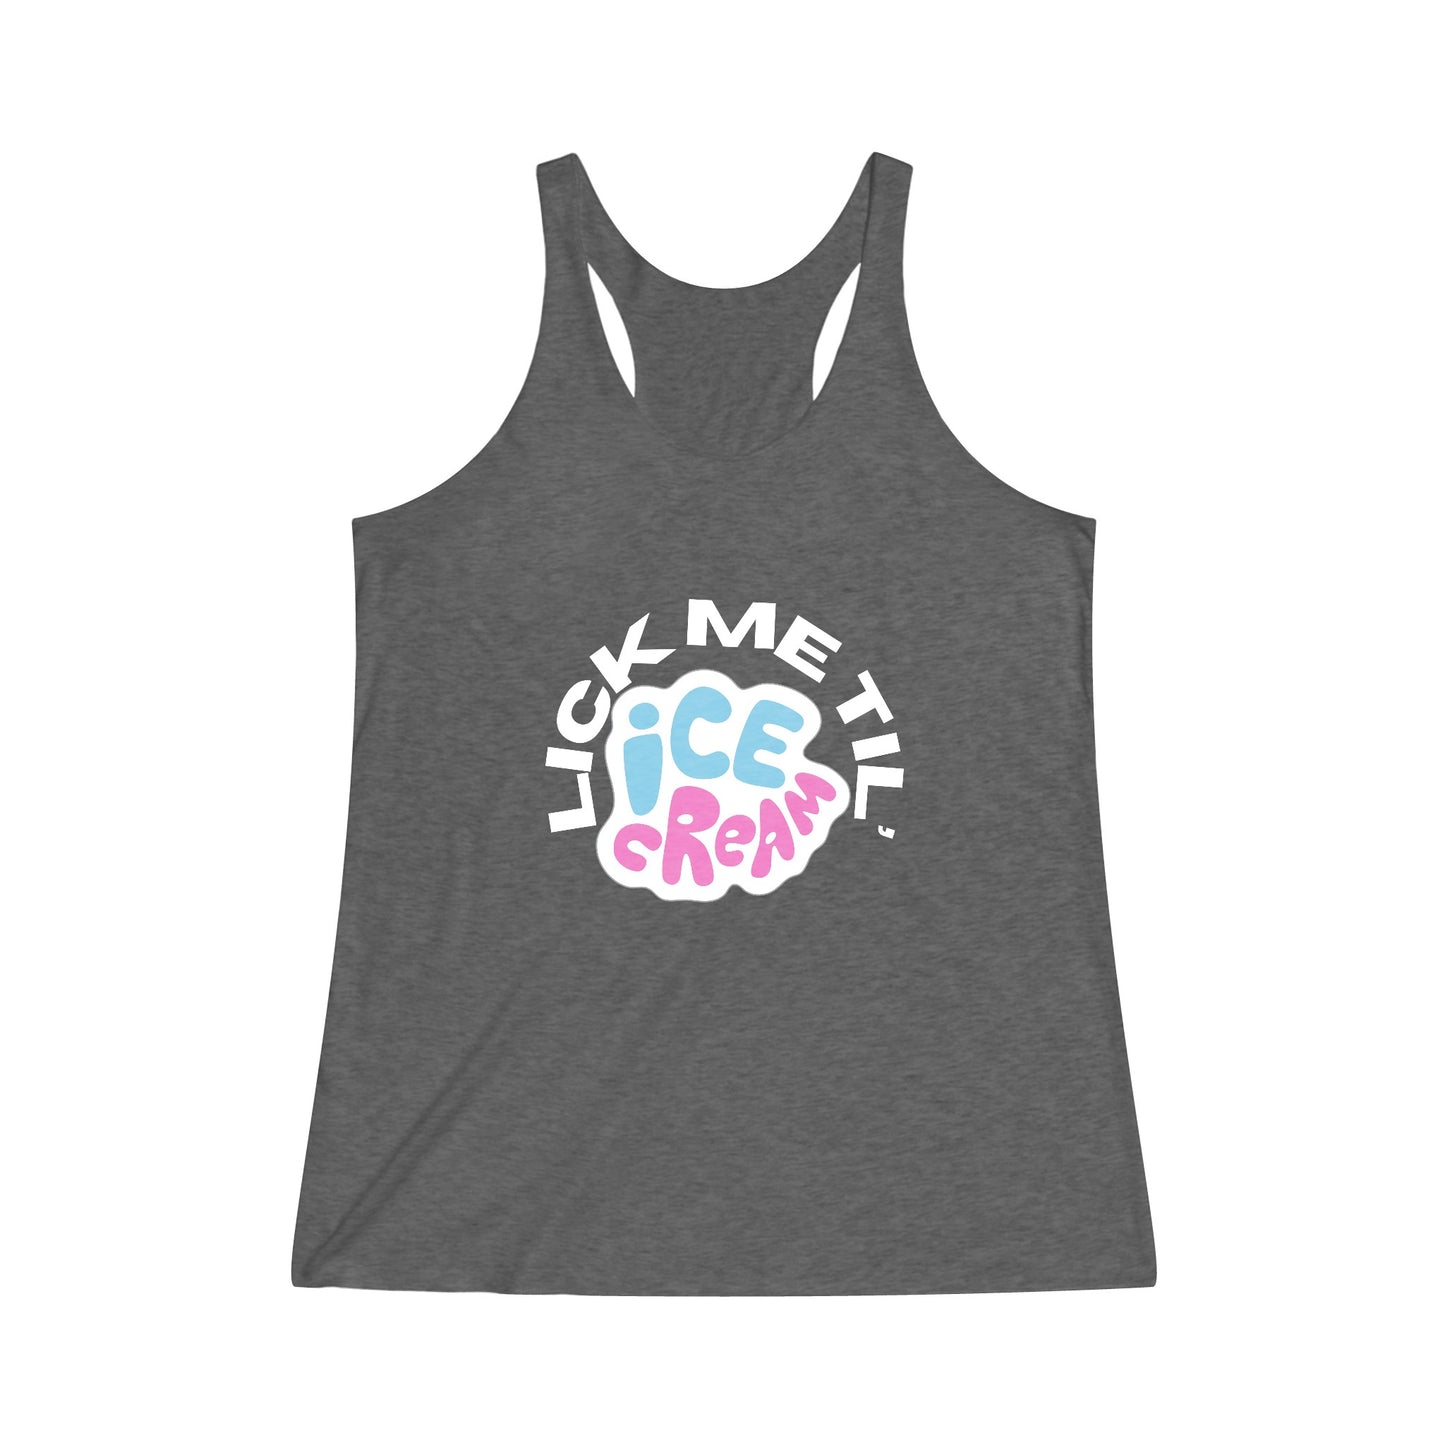 The Stamina for Men Lick me till Ice cream woman's fitted vintage black tank top product shot with white background